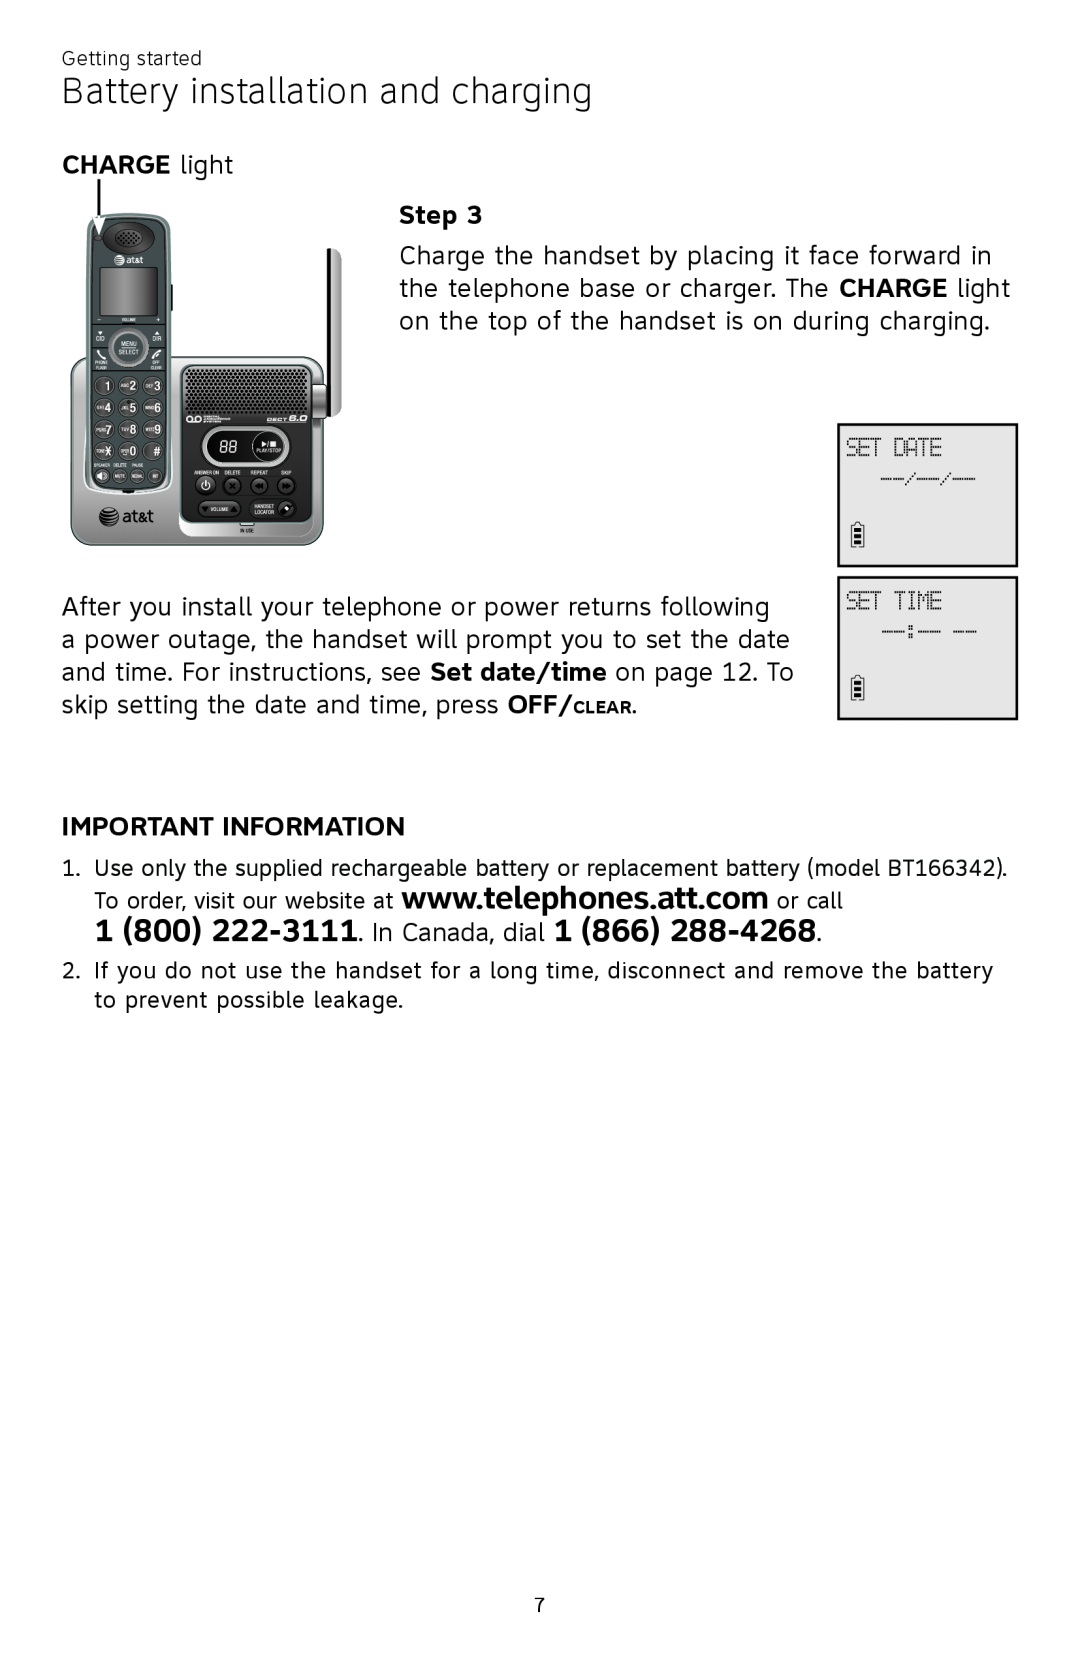 AT&T CL82450 user manual CHARGE light Step, Battery installation and charging, 1 800 222-3111. In Canada, dial 1 866 